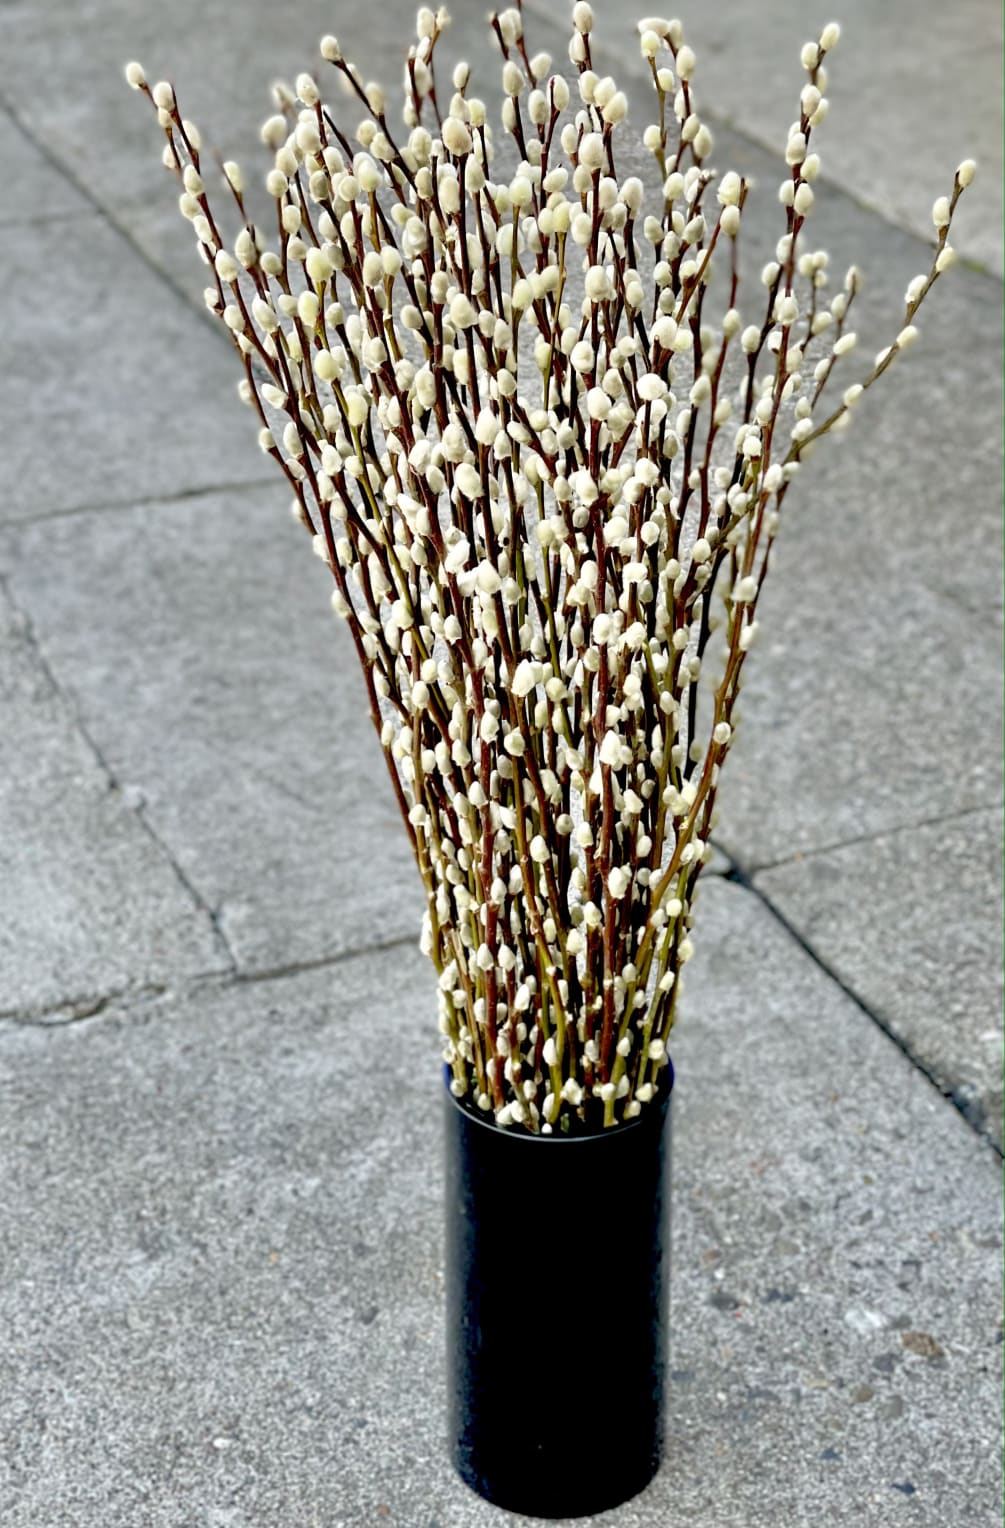 Premium silver tip pussy willow branches from Oregon in a sleek black